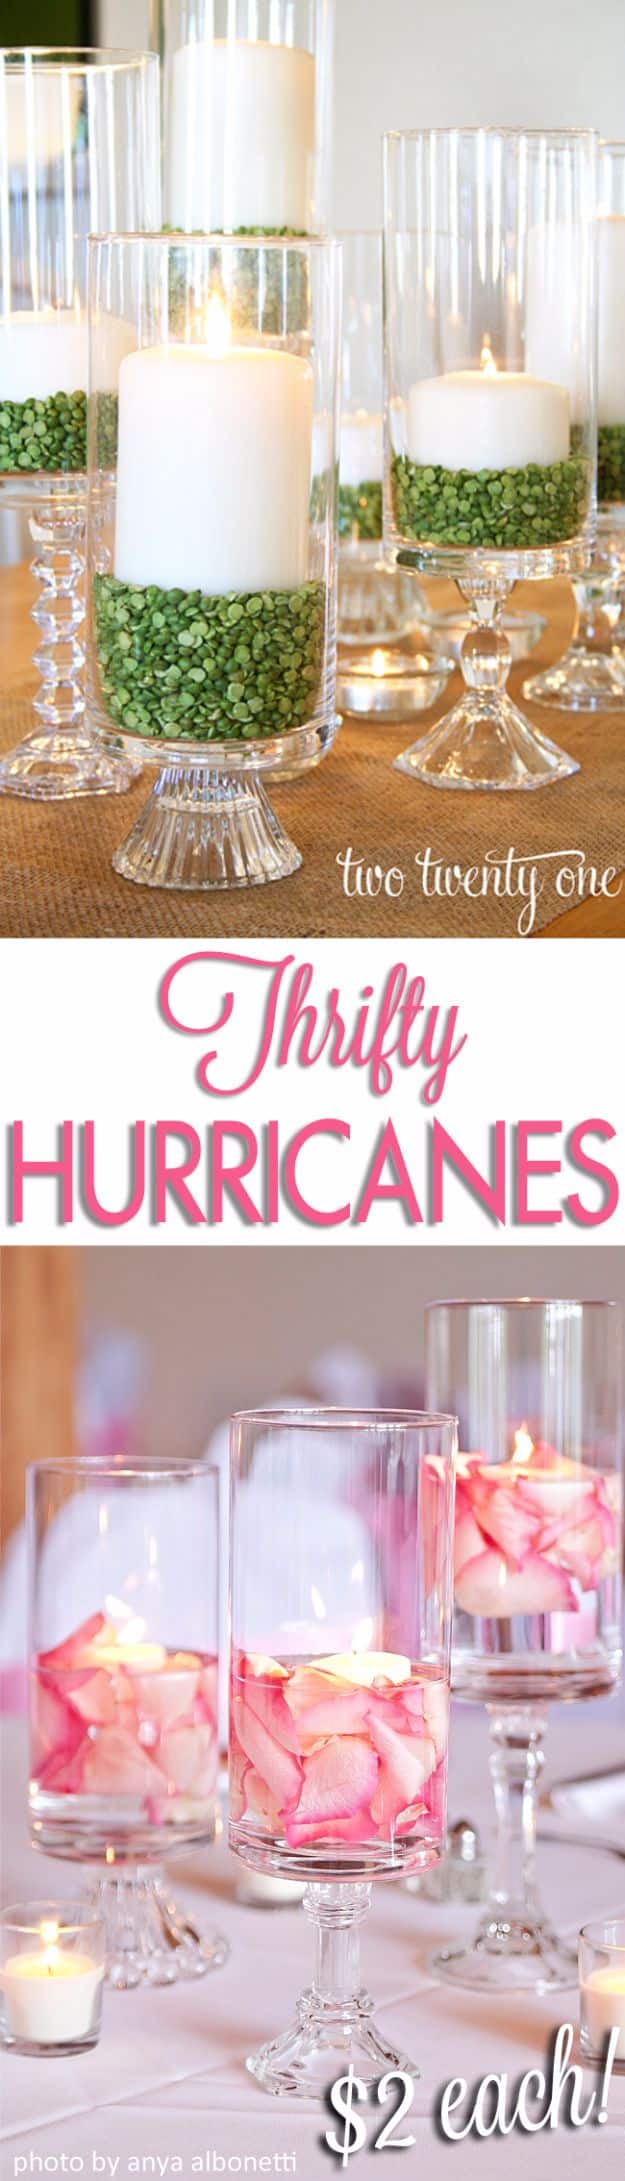 DIY Wedding Decor - Thrifty Hurricanes - Easy and Cheap Project Ideas with Things Found in Dollar Stores - Simple and Creative Backdrops for Receptions On A Budget - Rustic, Elegant, and Vintage Paper Ideas for Centerpieces, and Vases 